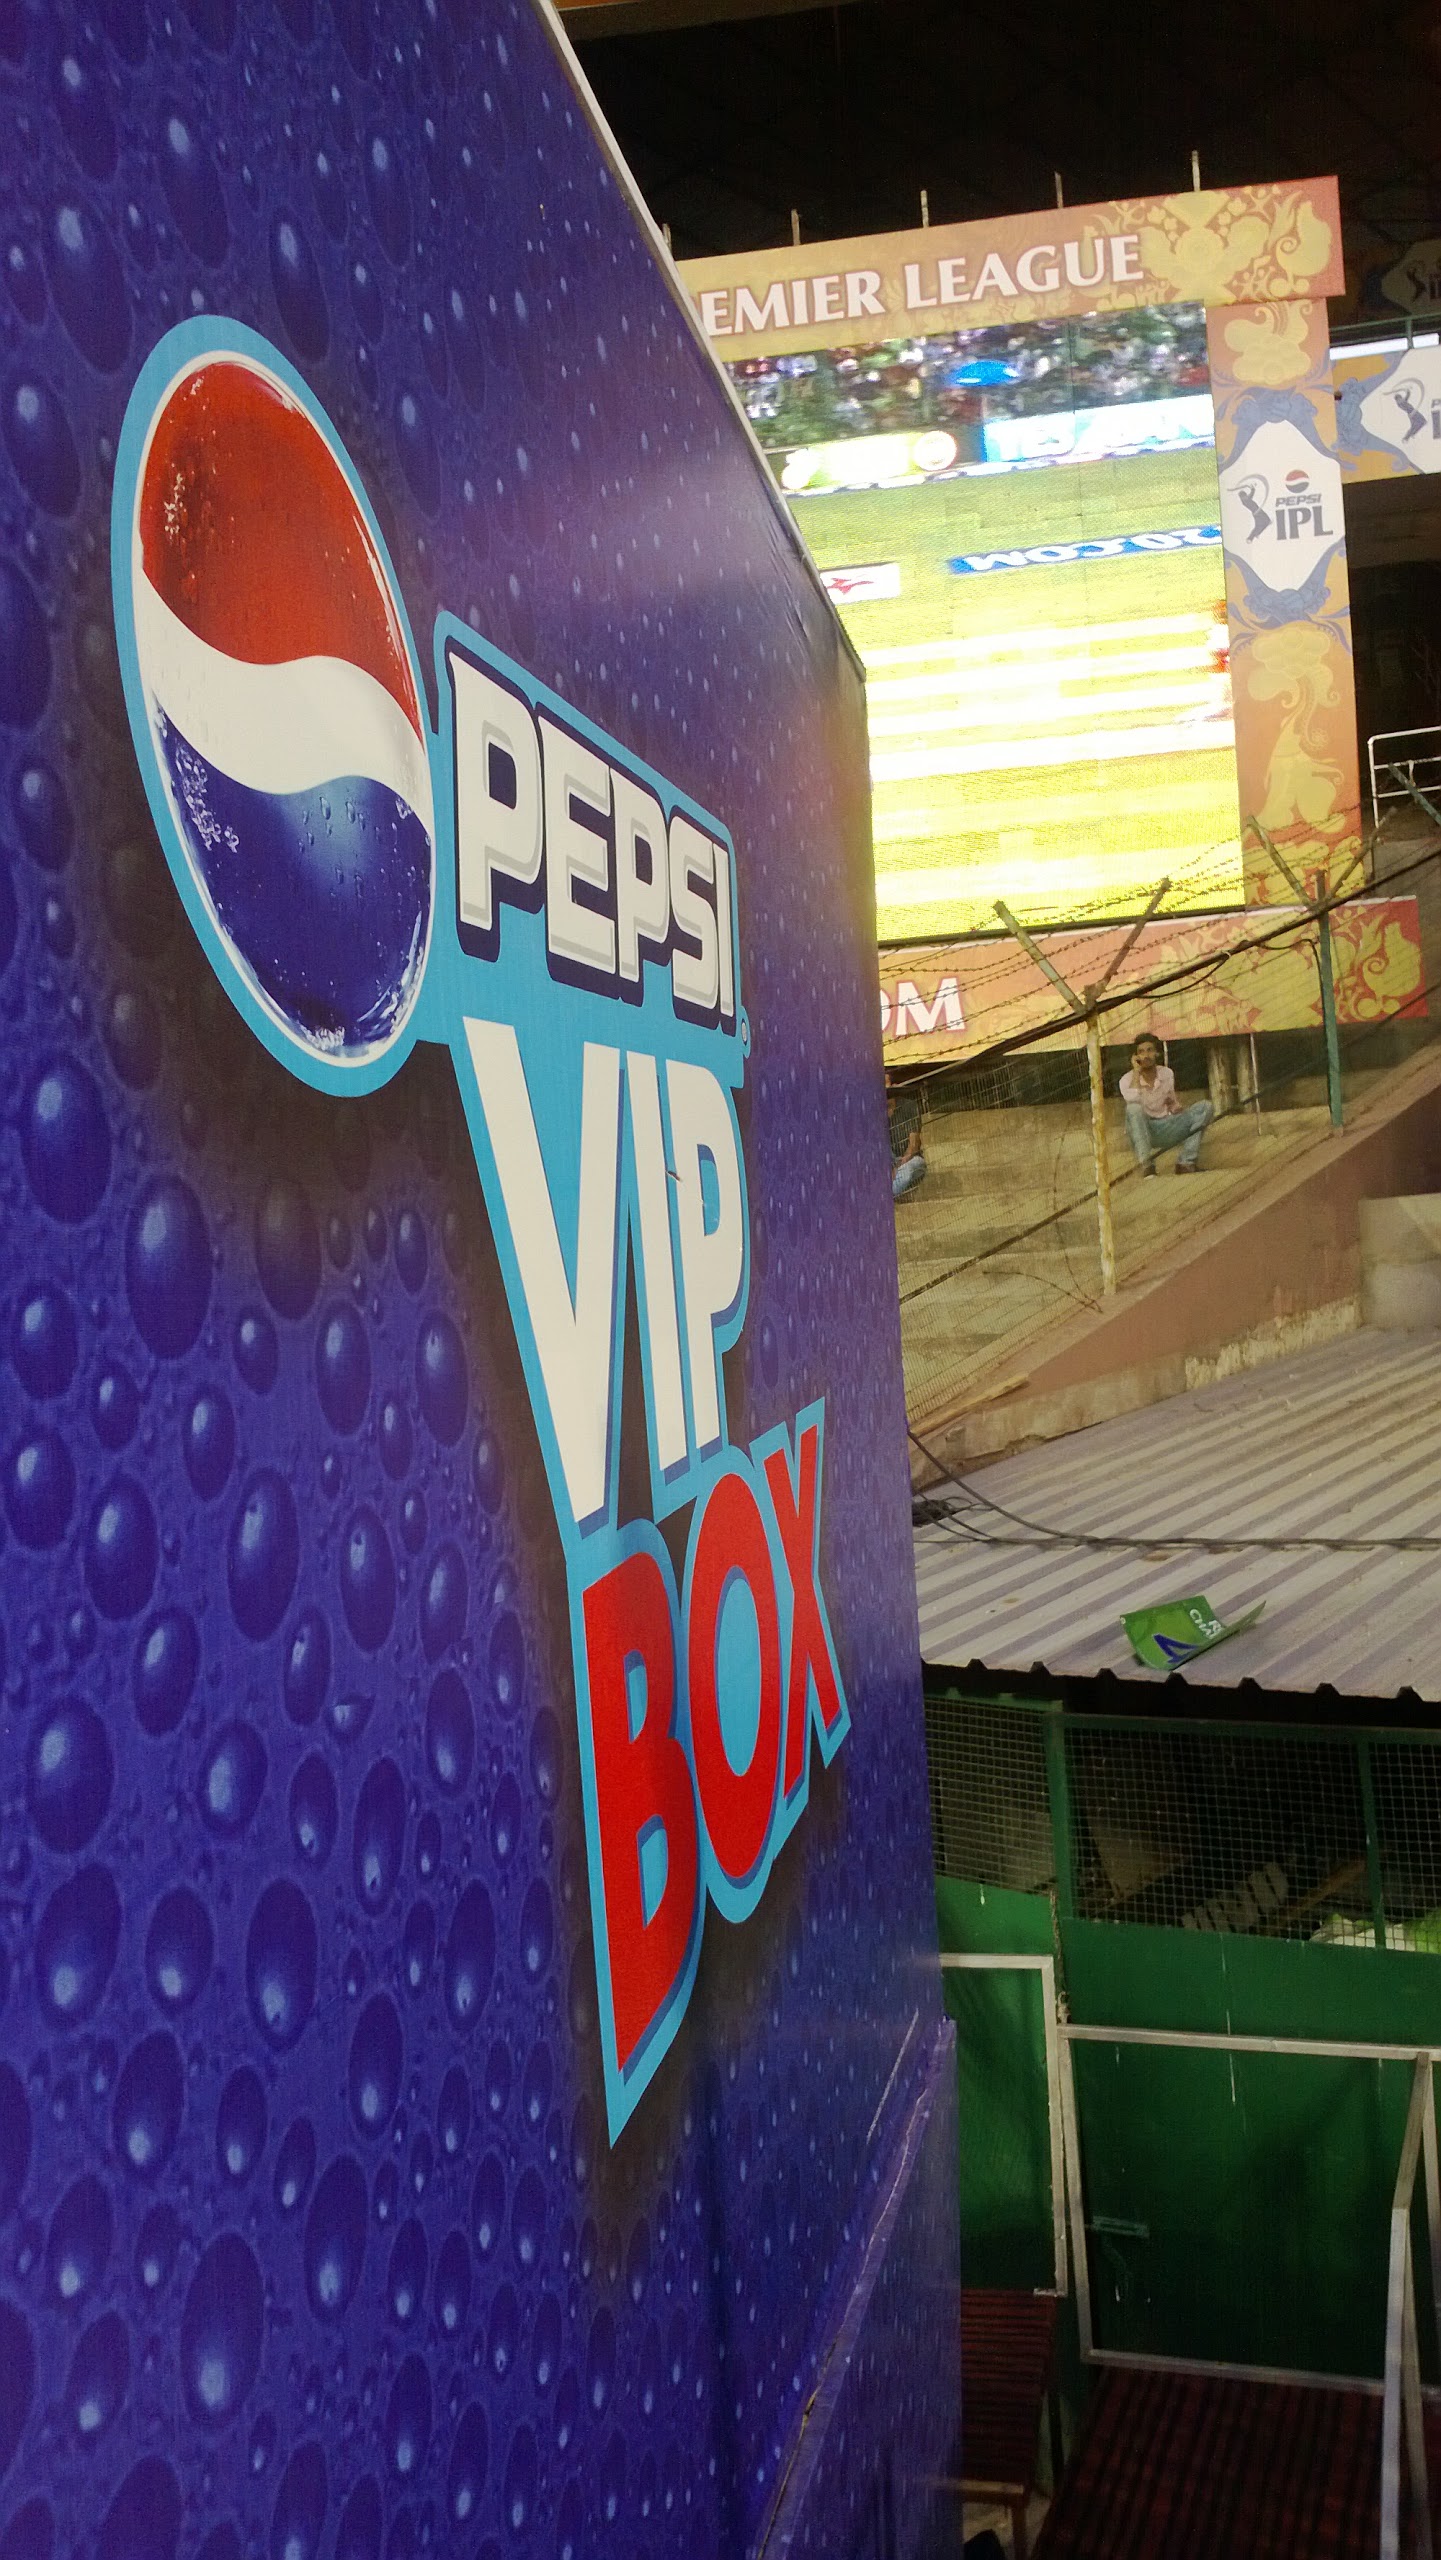 Match Experience at the PEPSI IPL VIP Box Mission Sharing Knowledge